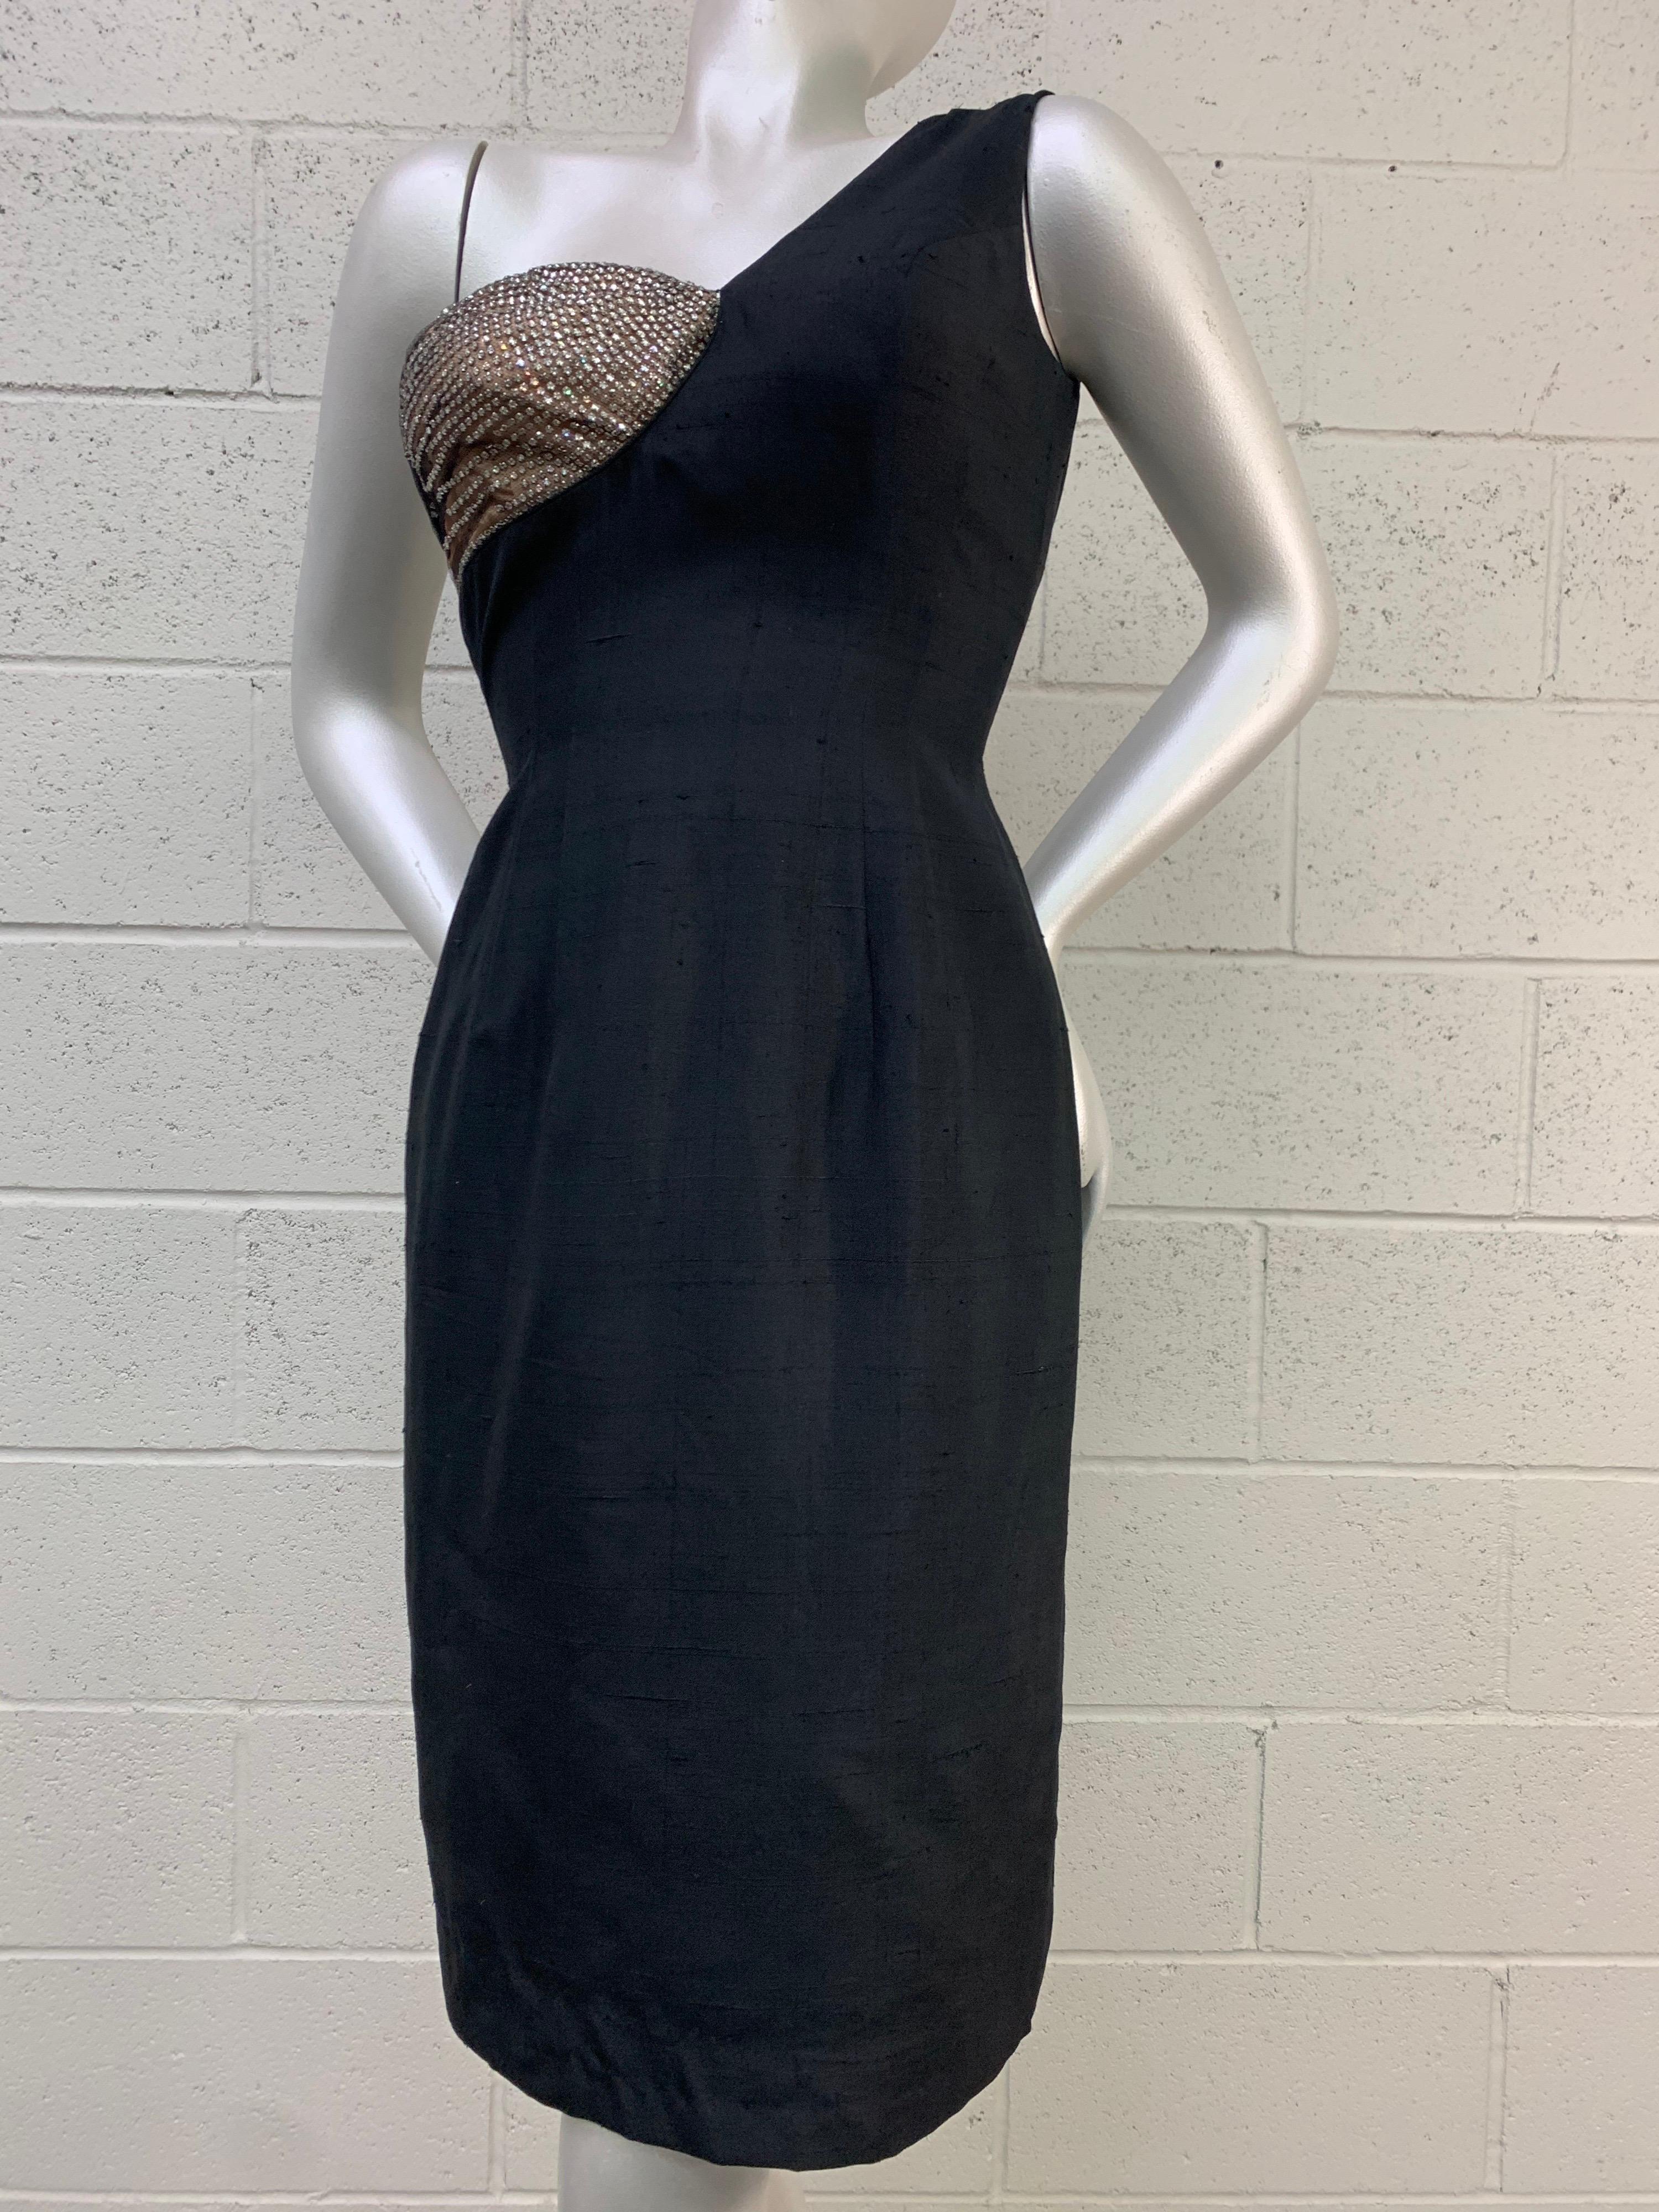 1960 Mr. Blackwell Black One-Shoulder Silk Sheath Dress w/ Rhinestone Bust: This rare and spectacular asymmetrical bust black cocktail sheath dress is covered on one breast with silver rhinestones on a structured and wired nude cup. Cut in the